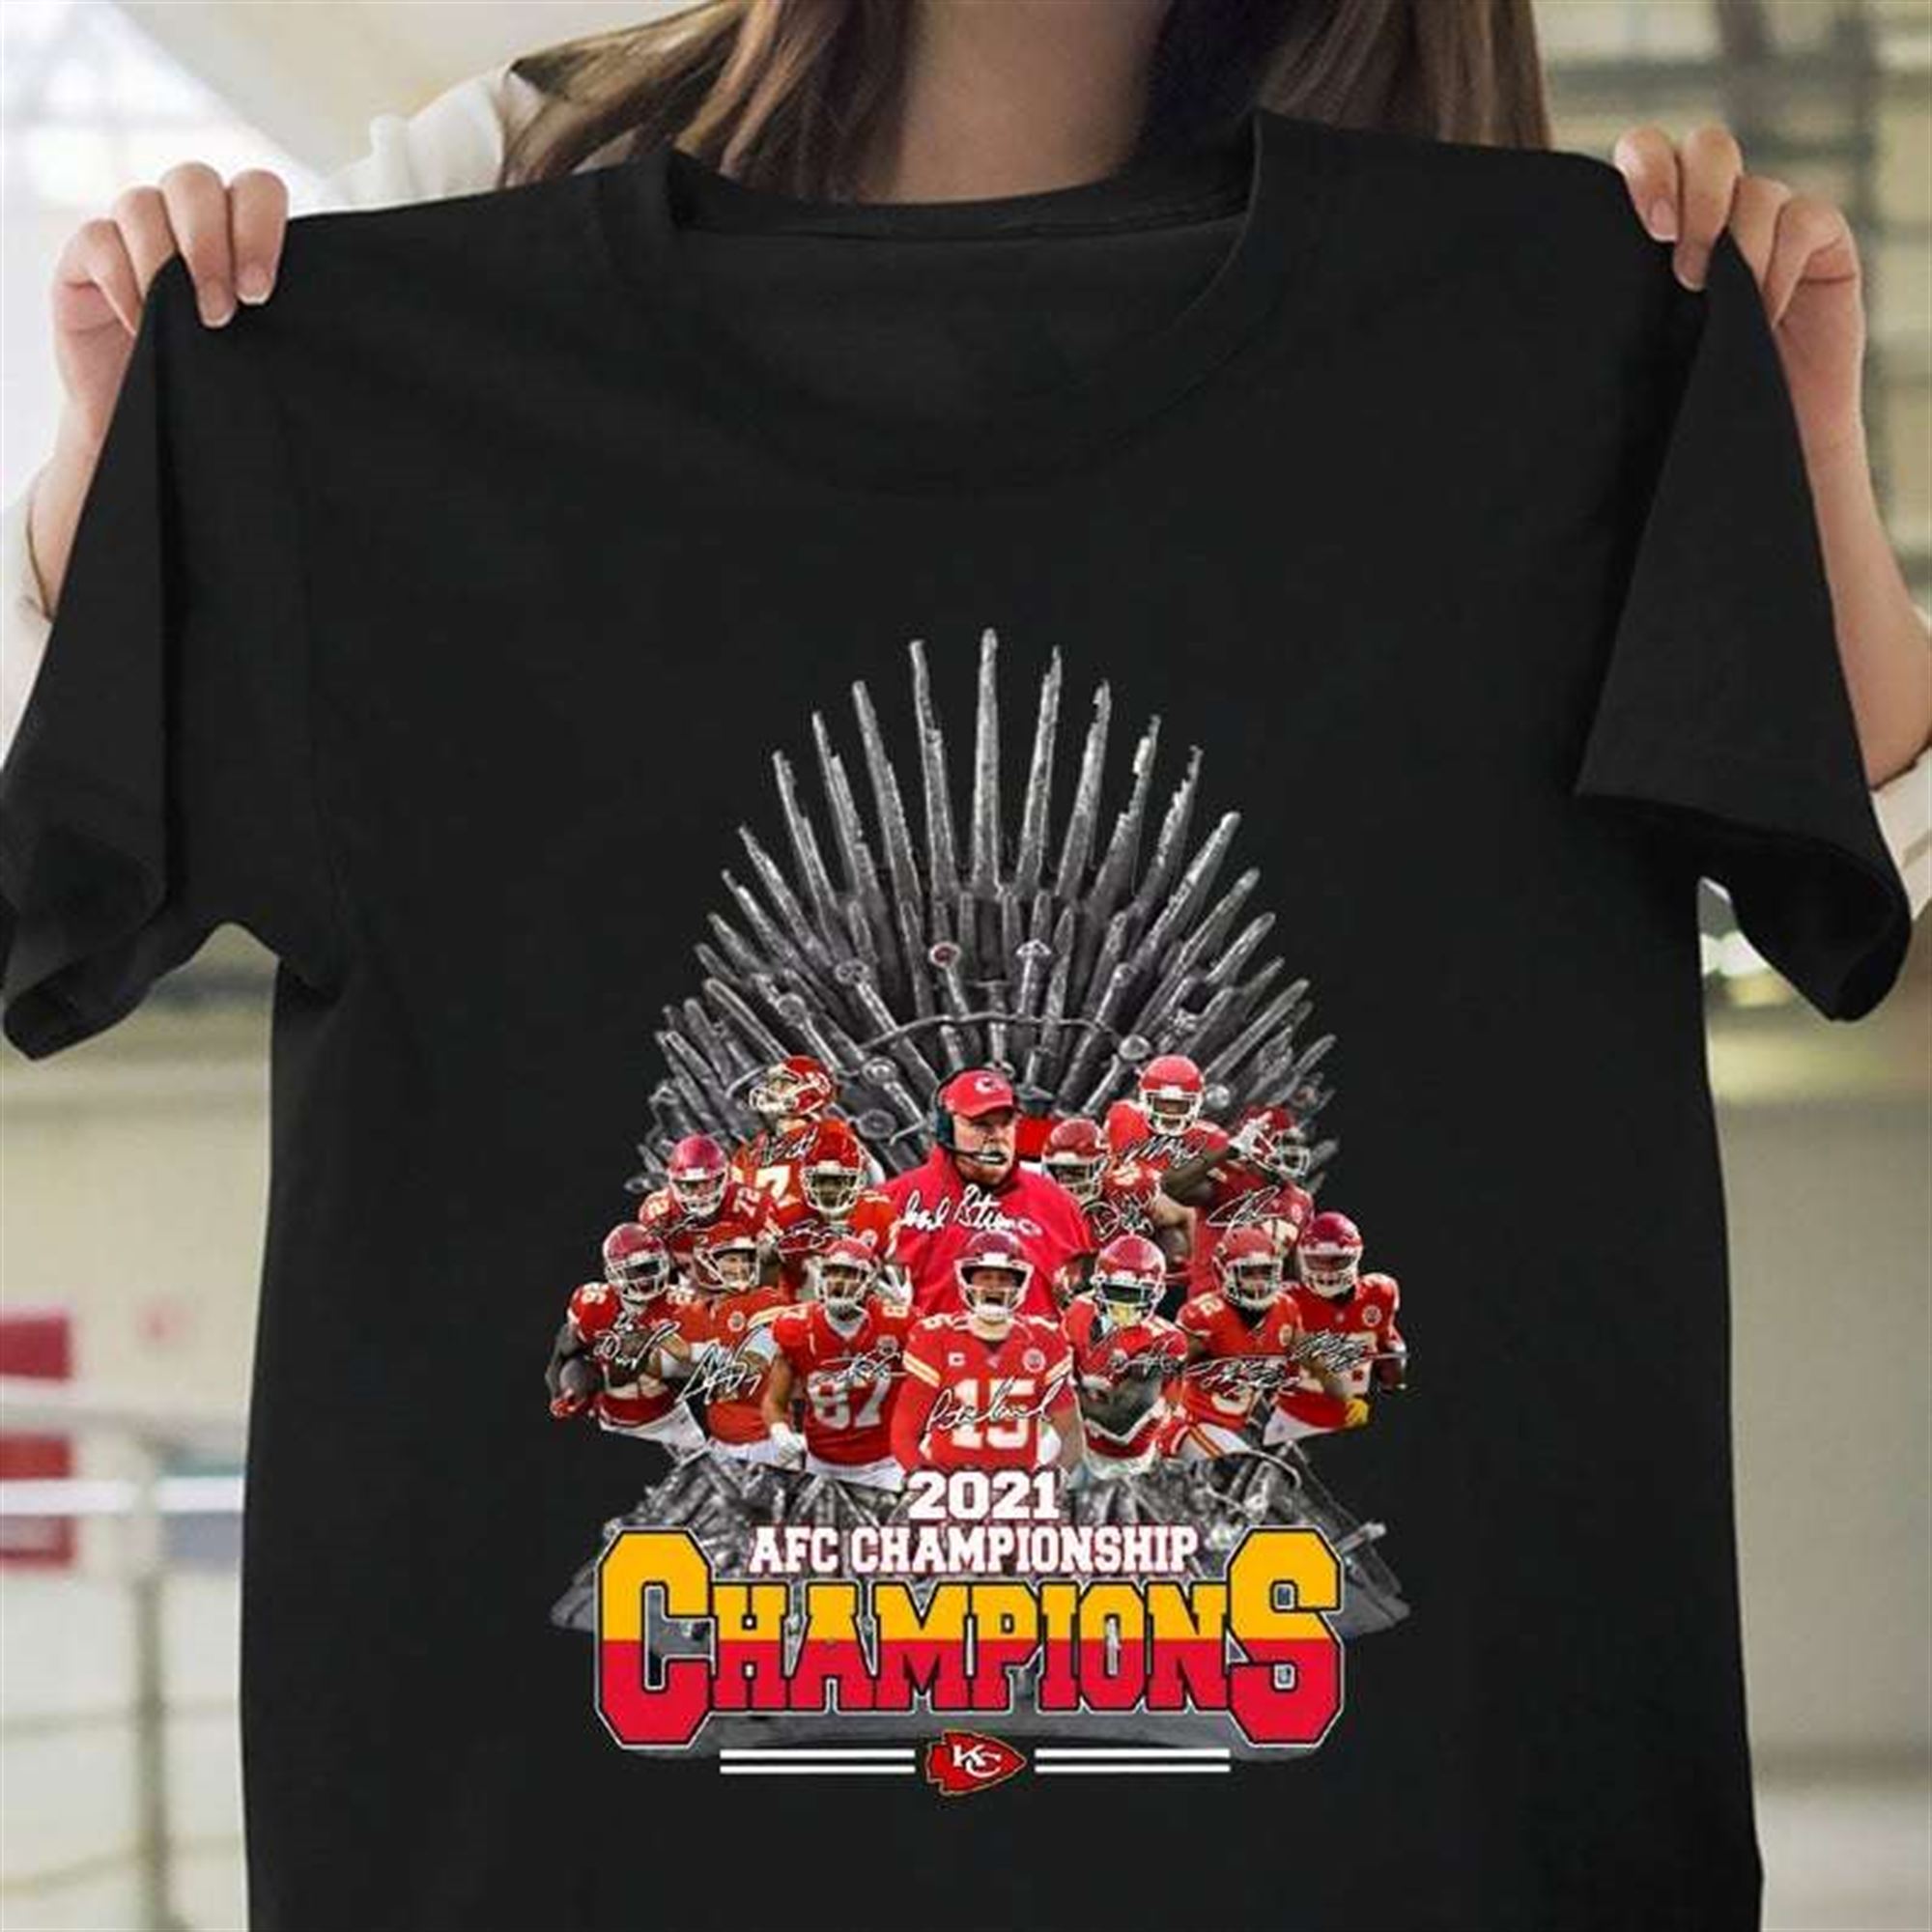 Rare Game Of Tampa Bay Buccaneers 2021 Super Bowl Liv Champions Unisex T-shirt Full Size Up To 5xl